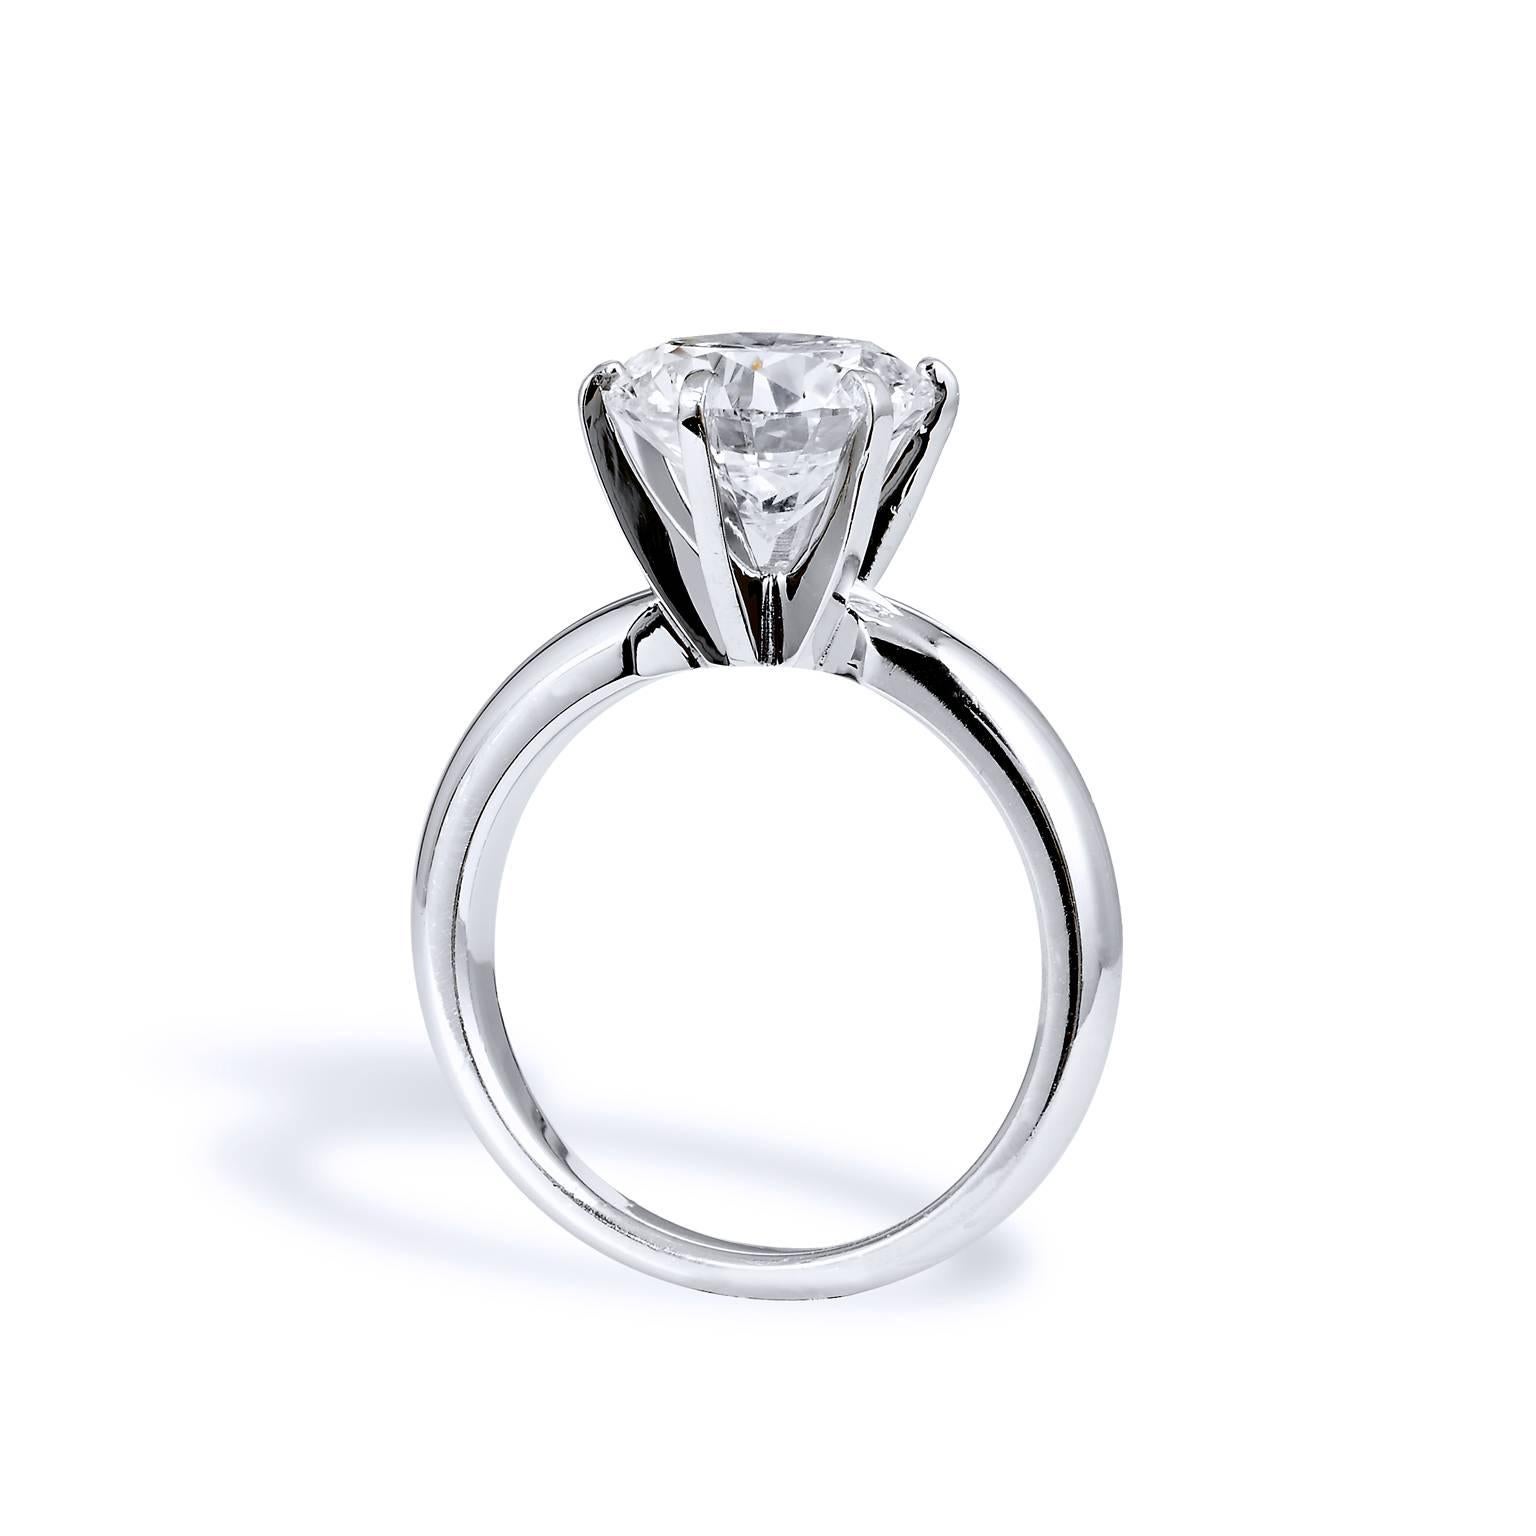 GIA Certified 3.04 Carat Diamond Platinum 4 Prong Solitaire Engagement Ring 2